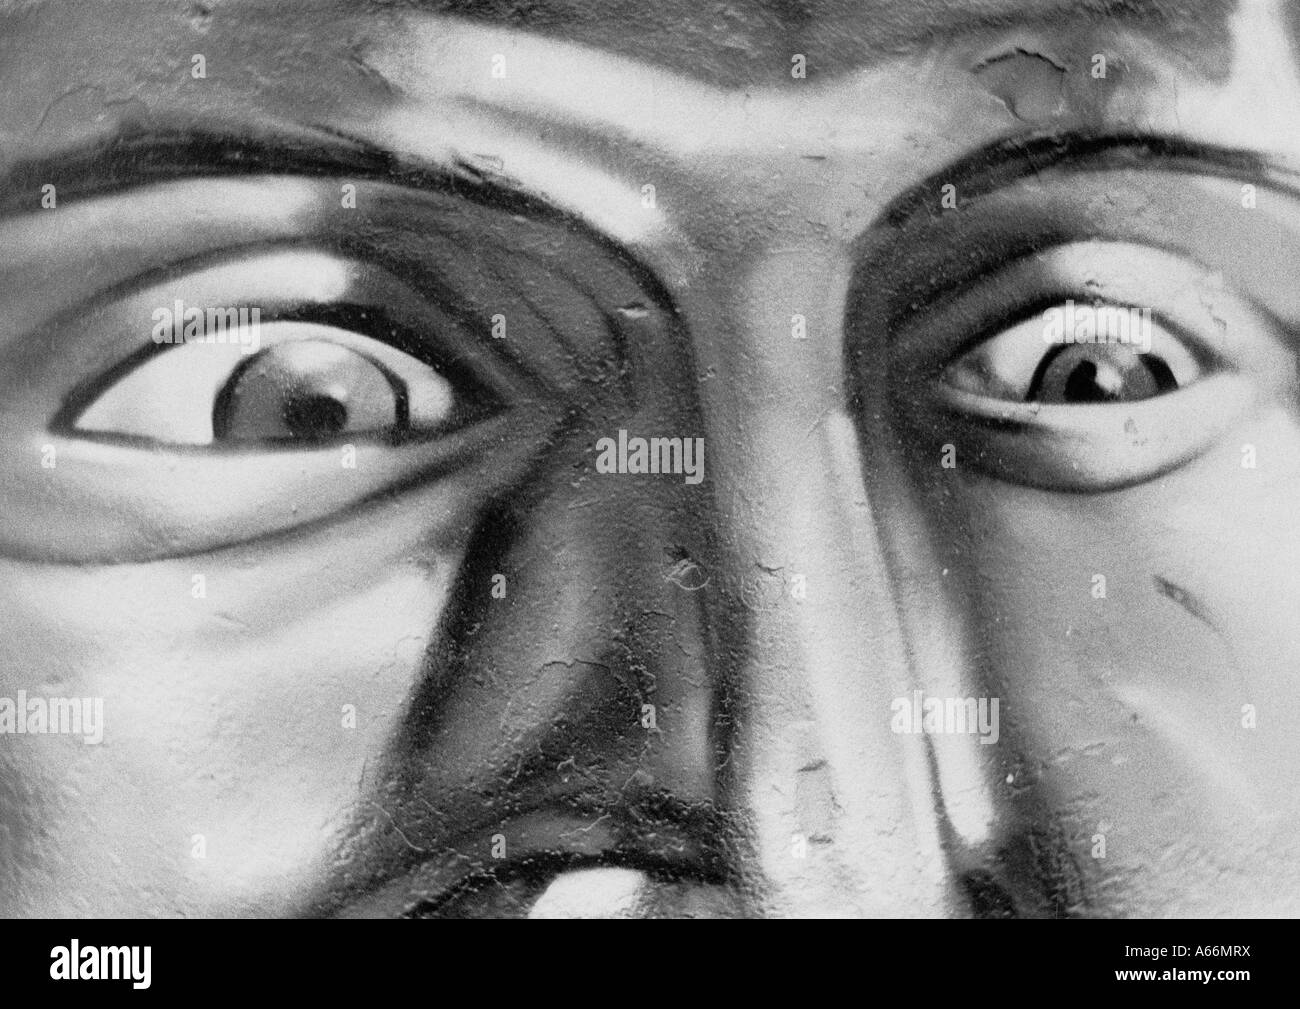 Black & White Grainy Image of Two Surprised Alarmed Eyes: Close Up of ...